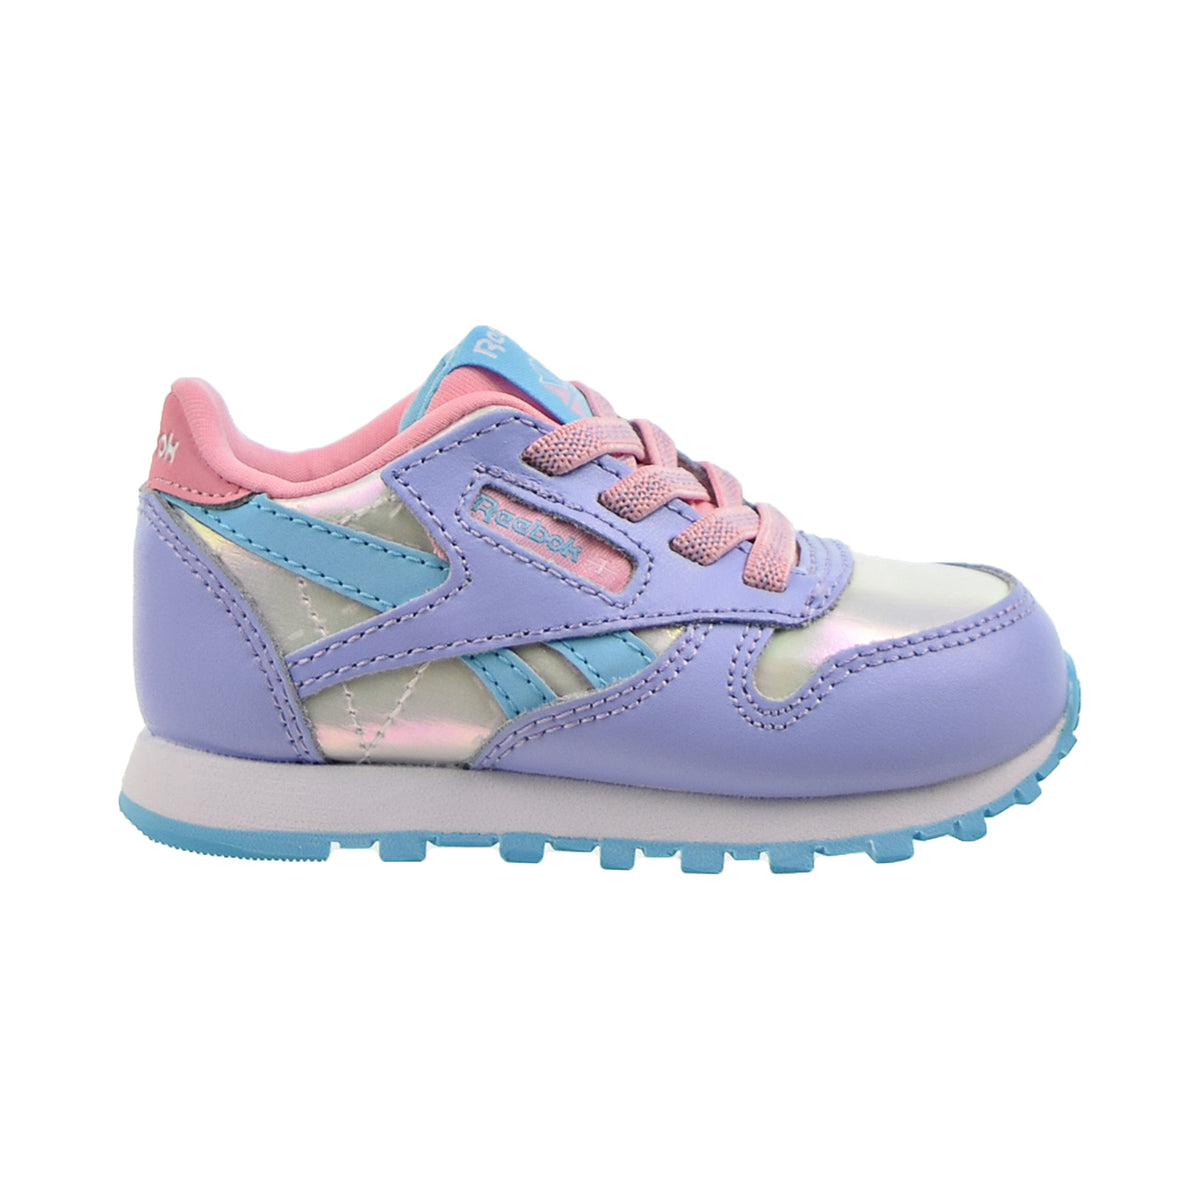 Reebok Leather Toddler's Shoes Glow-Digital Blue-Pink